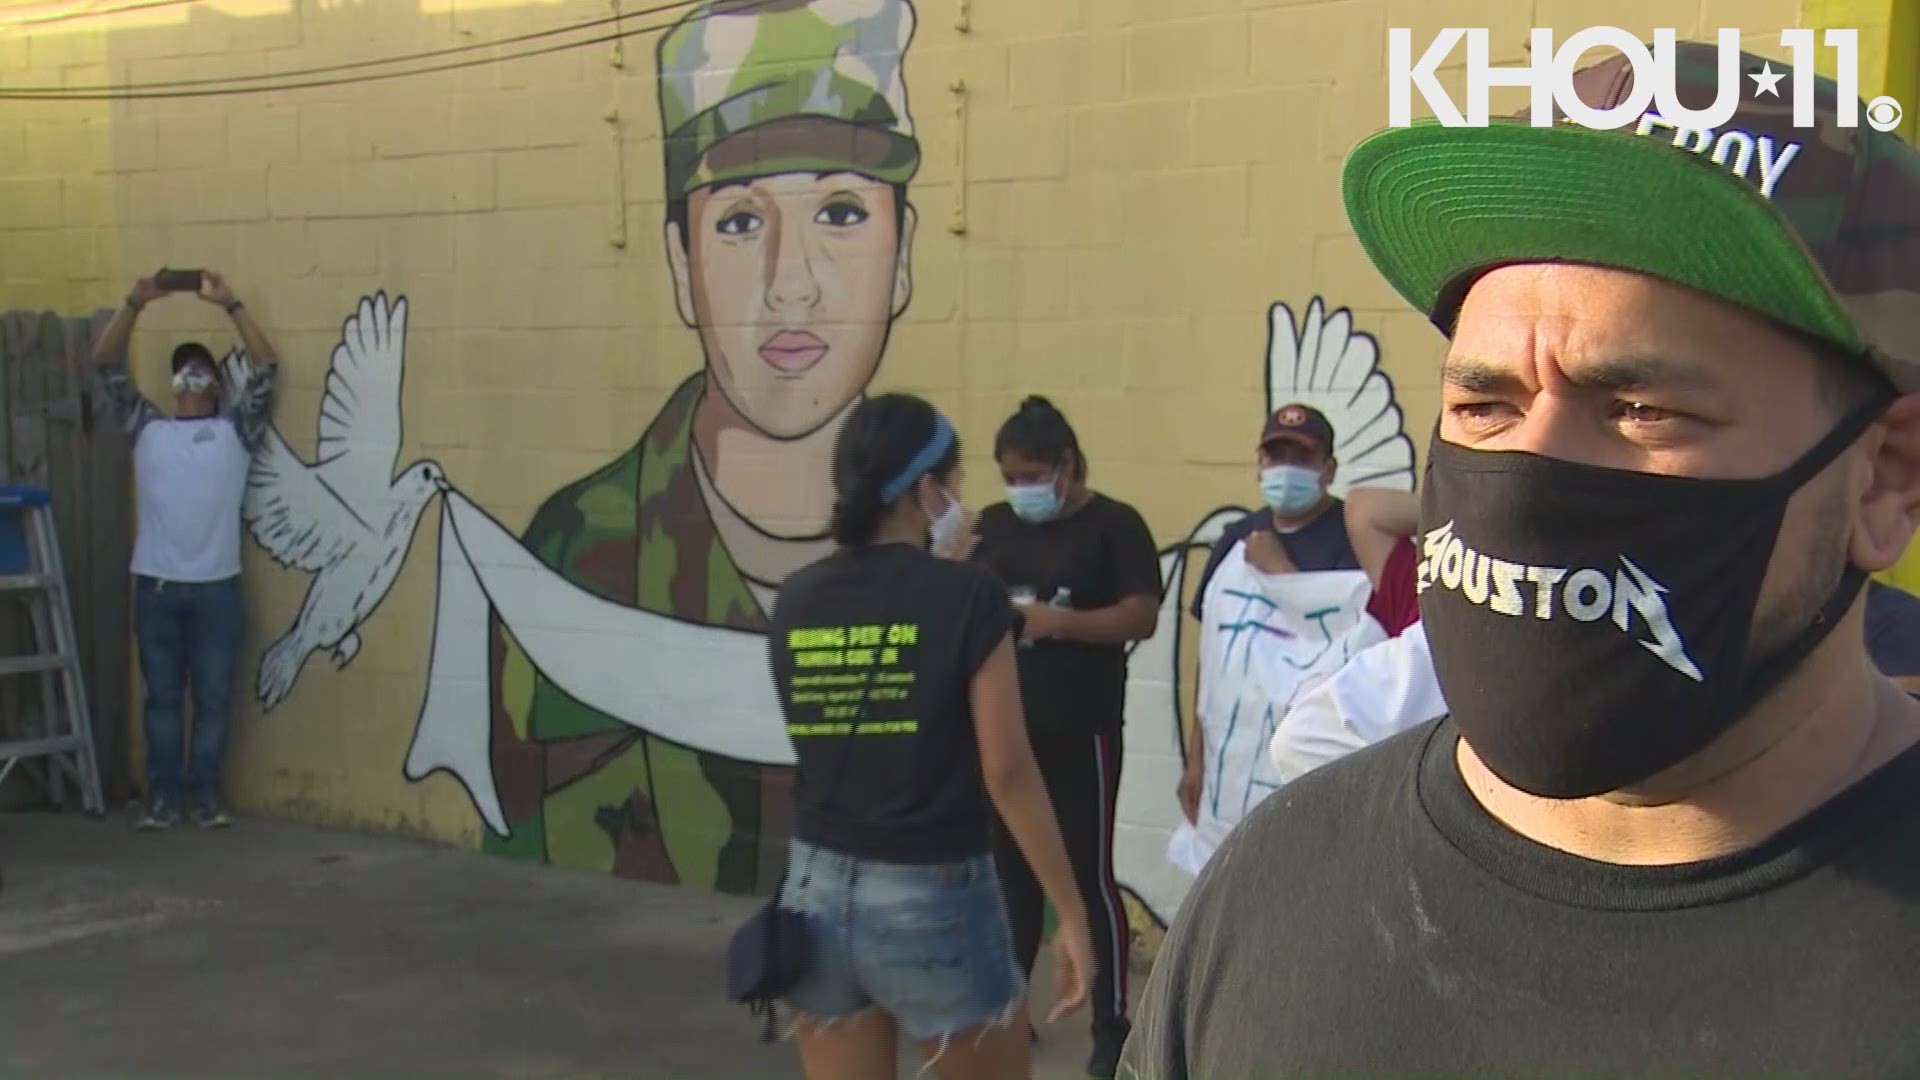 The artist said the location of the mural was important to him because he and Vanessa Guillen are from the same area.